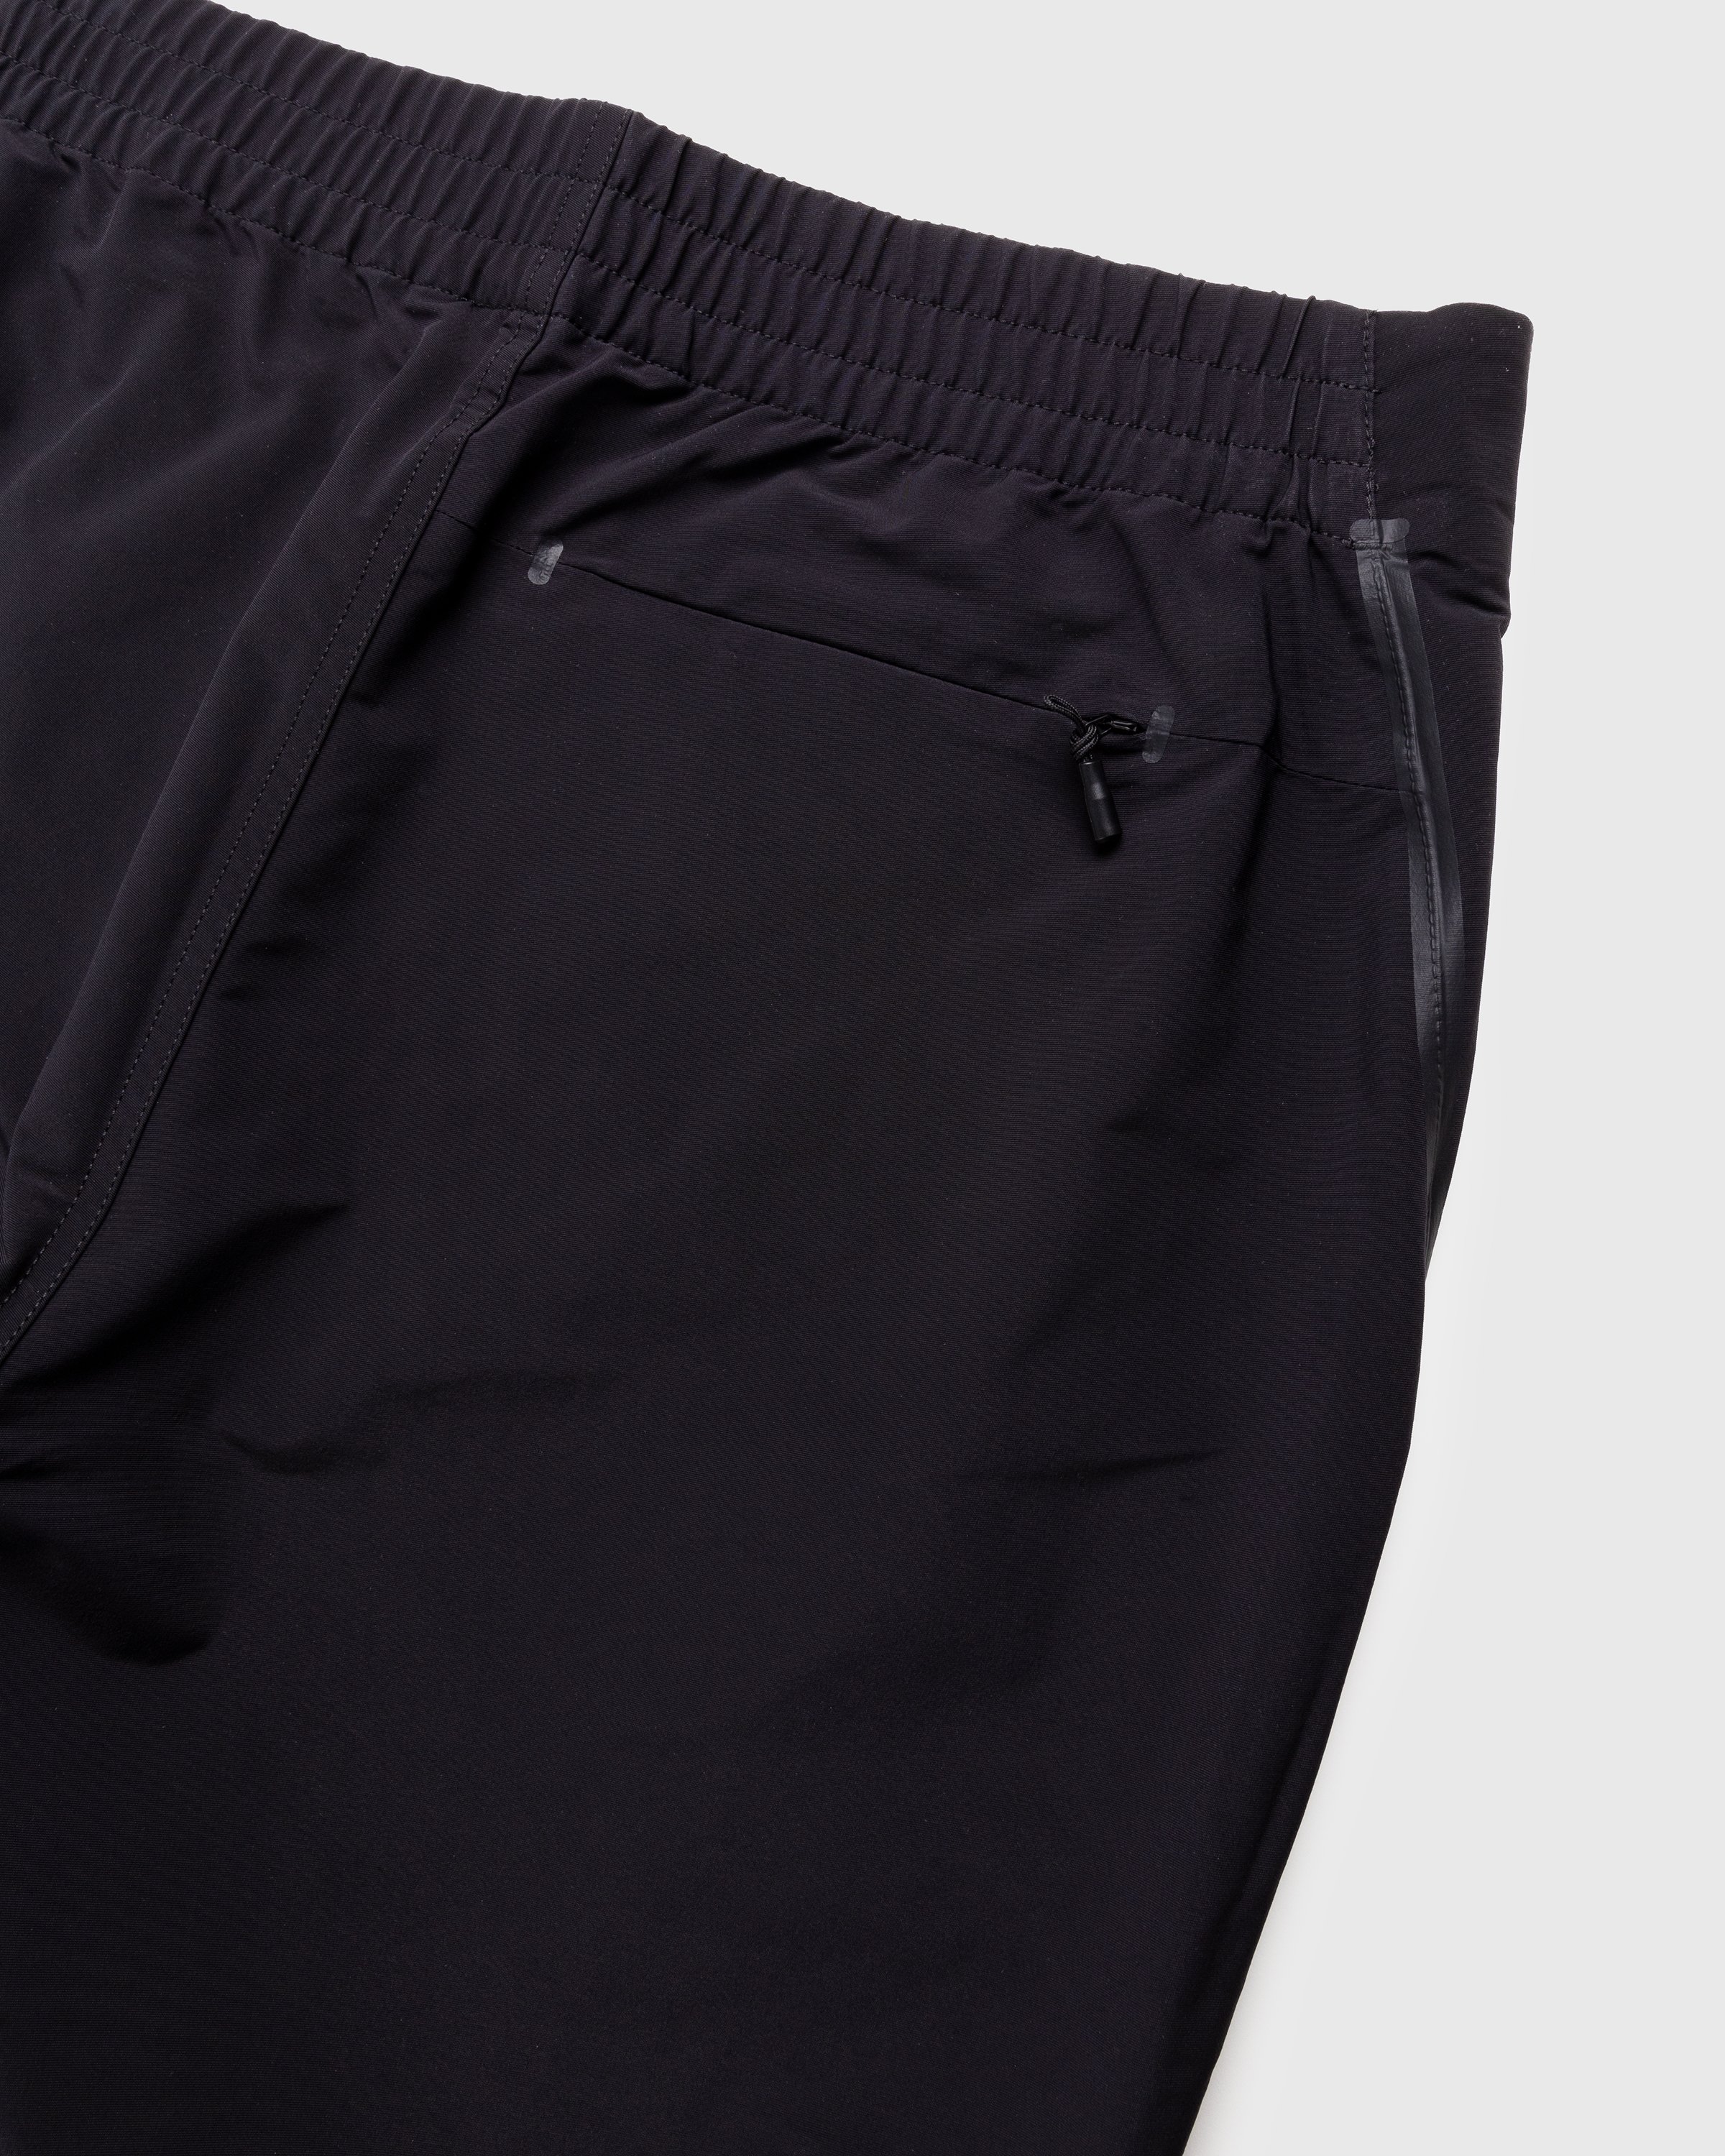 The North Face - RMST Mountain Pant Black - Clothing - Black - Image 6